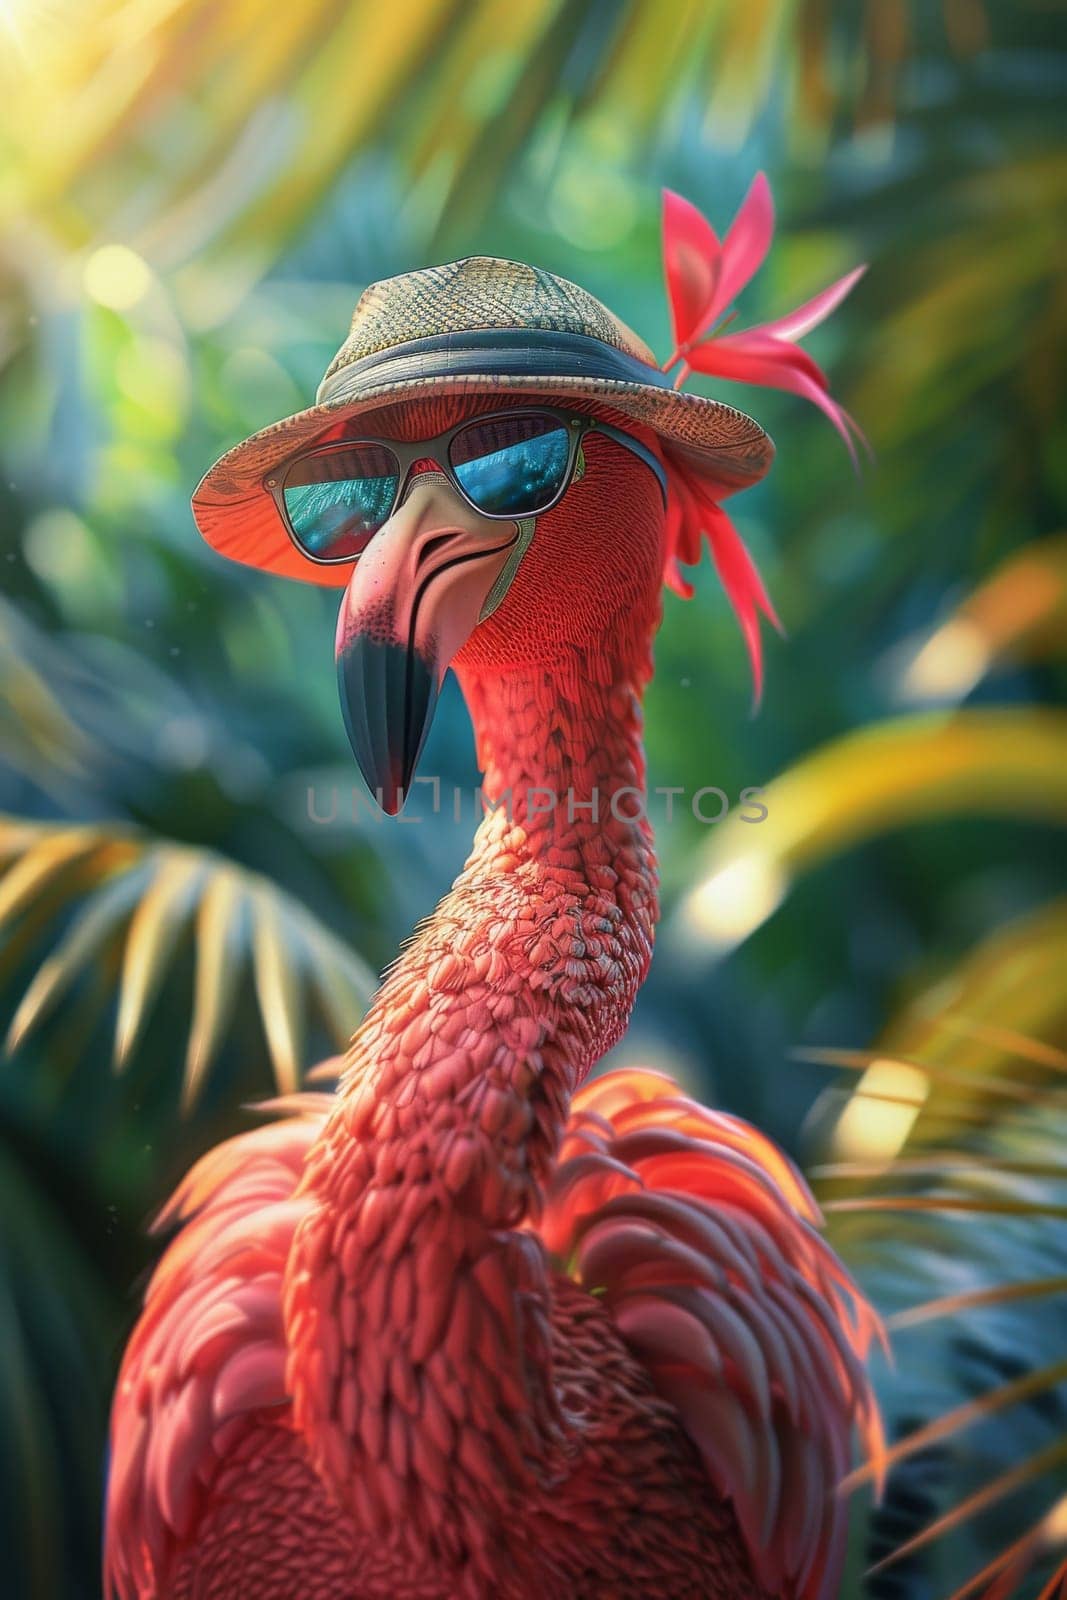 A cartoon flamingo wearing a hat and sunglasses. The flamingo is smiling and looking at the camera